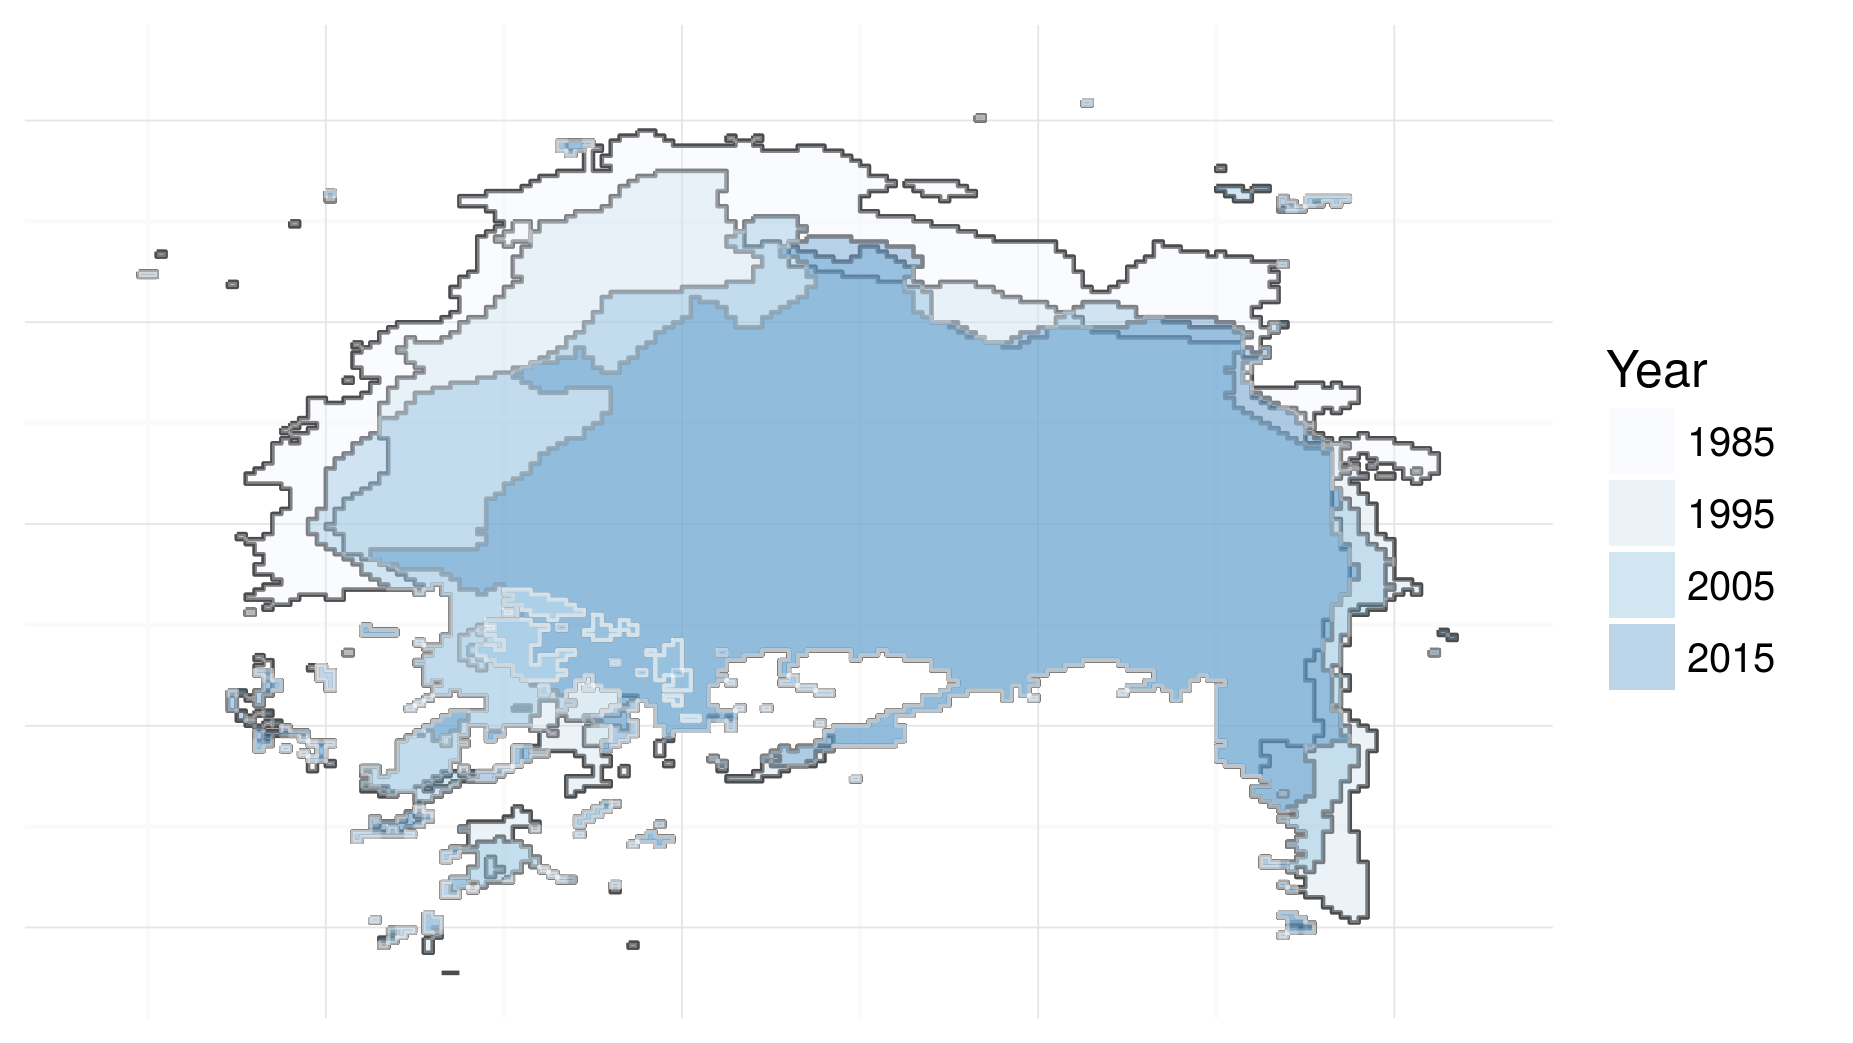 Visualisation of North Pole icesheet decline, generated using the code profiled using the profvis package.